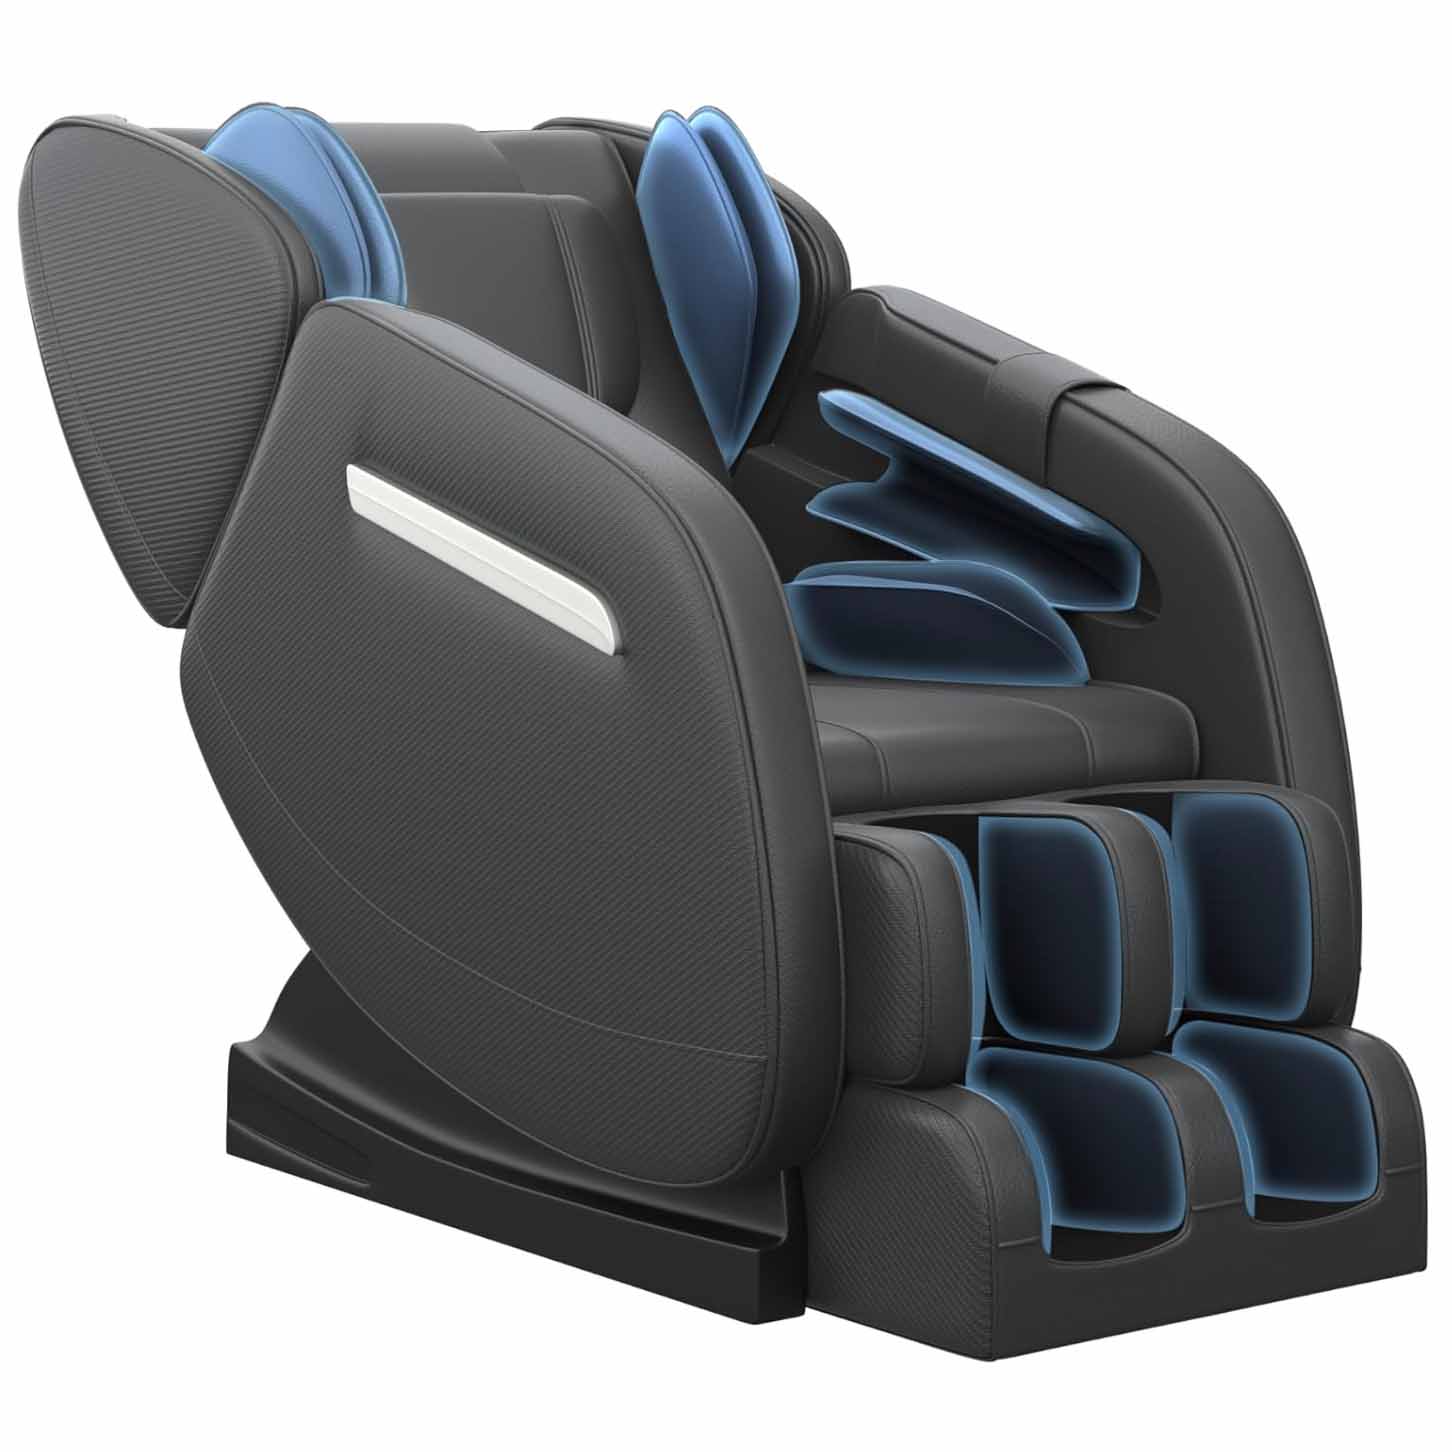 Black and blue massage chair